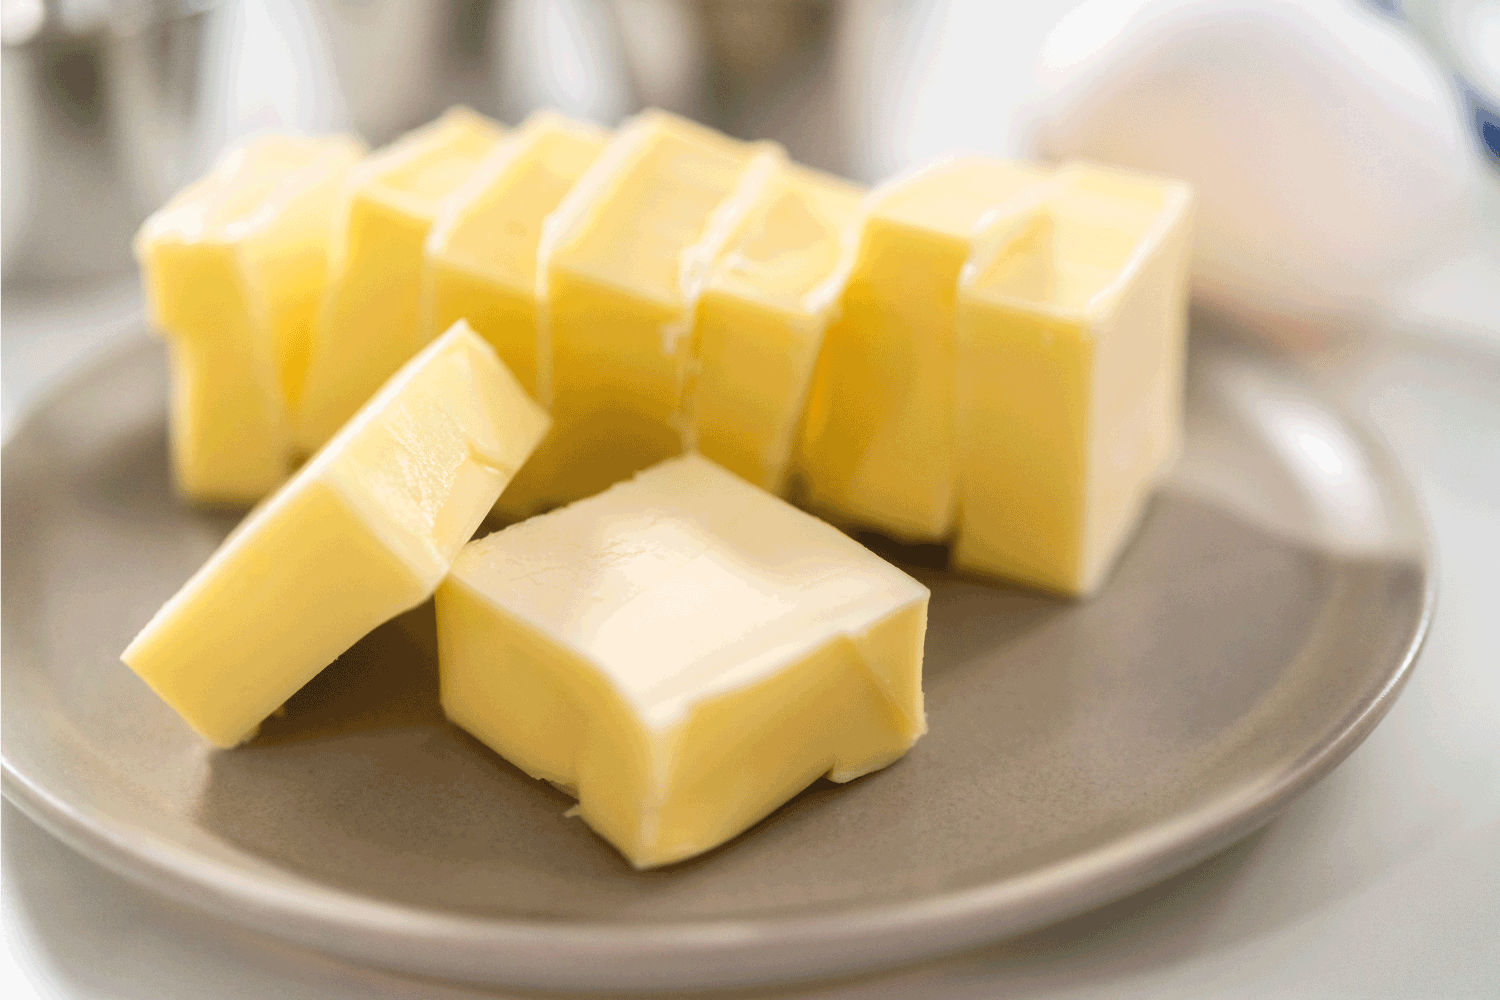 Stick of butter sliced in small cubes for baking